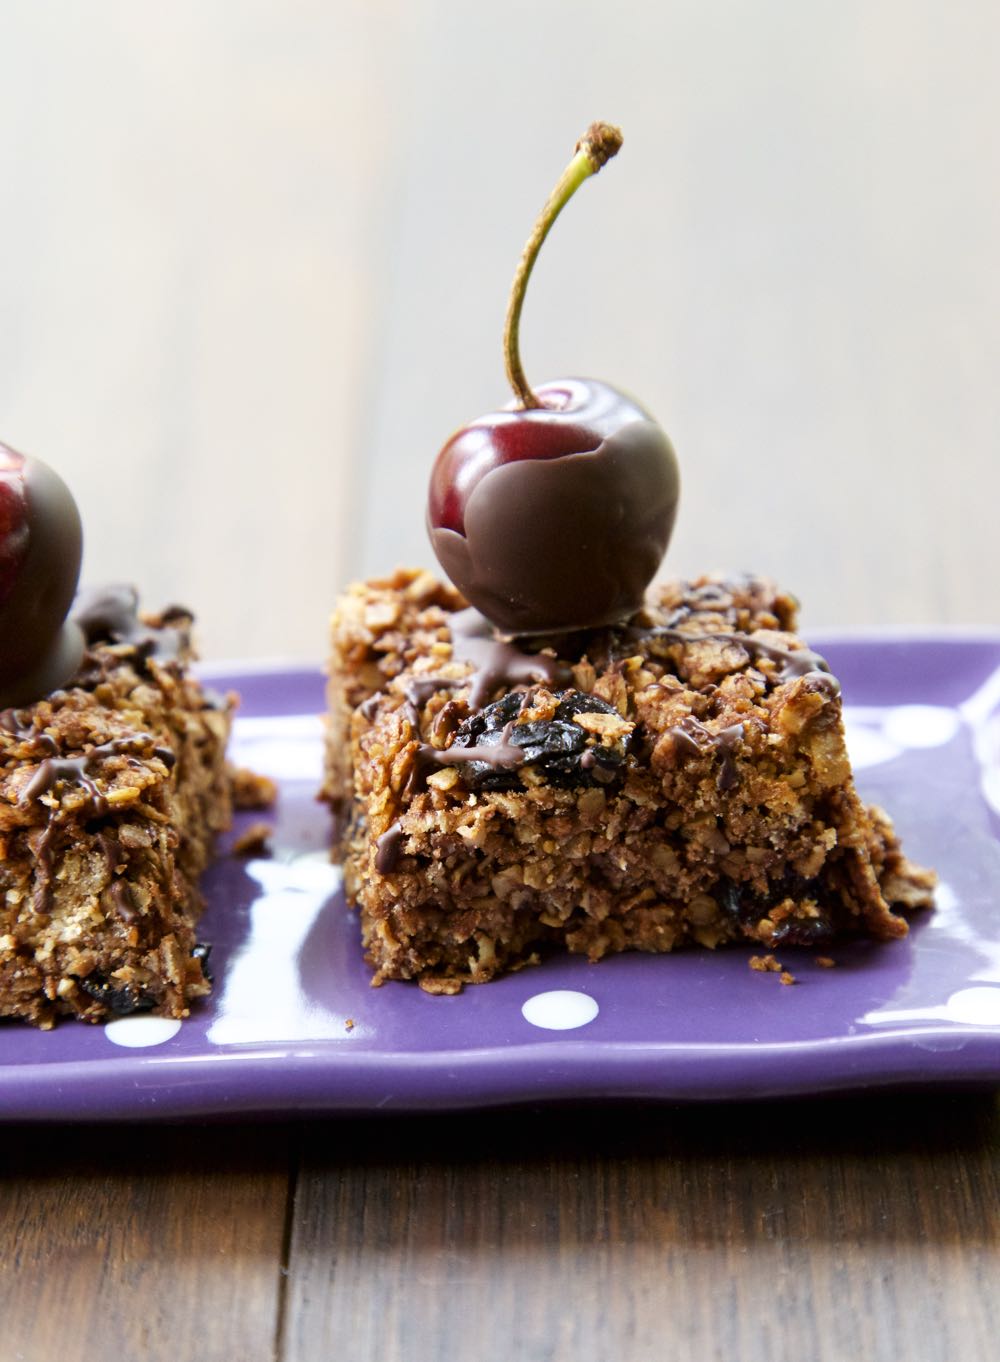 Chocolate Flapjack topped with a chocolate coated fresh cherry sitting on a purple polka dot serving tray.